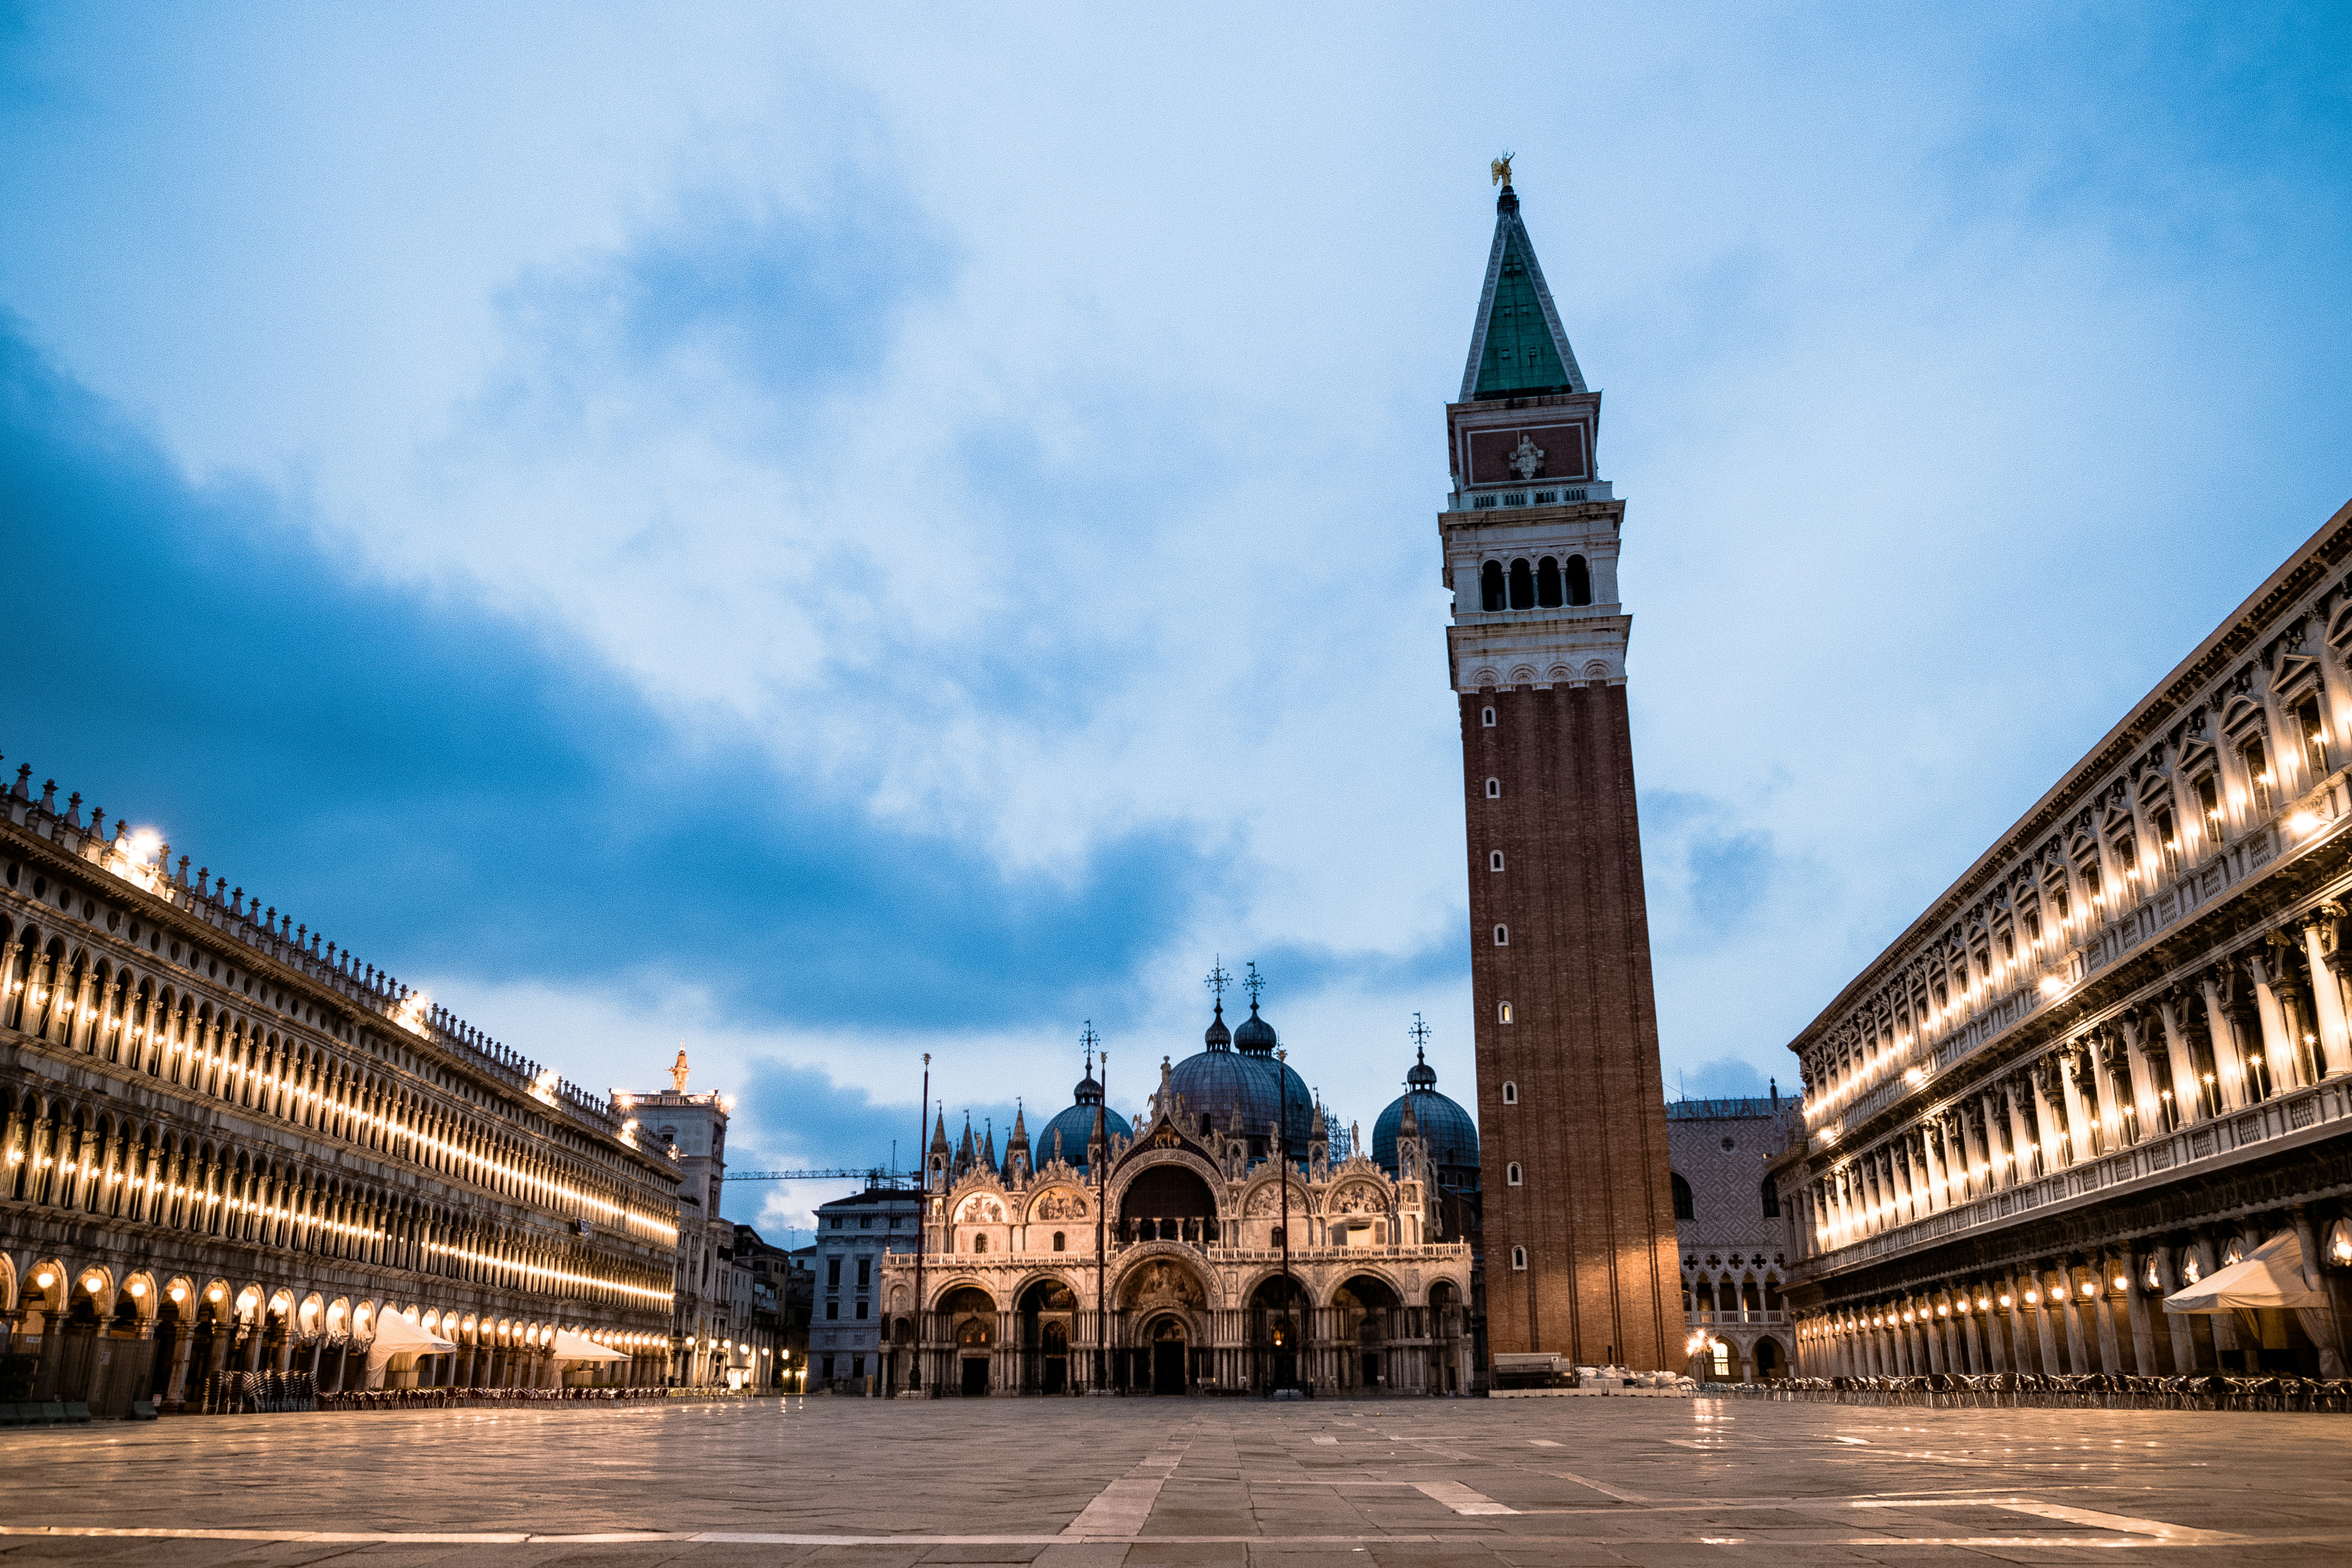 Cloudy sunrise in Venice, San Marco square, just a couple of seconds before the lights went to off